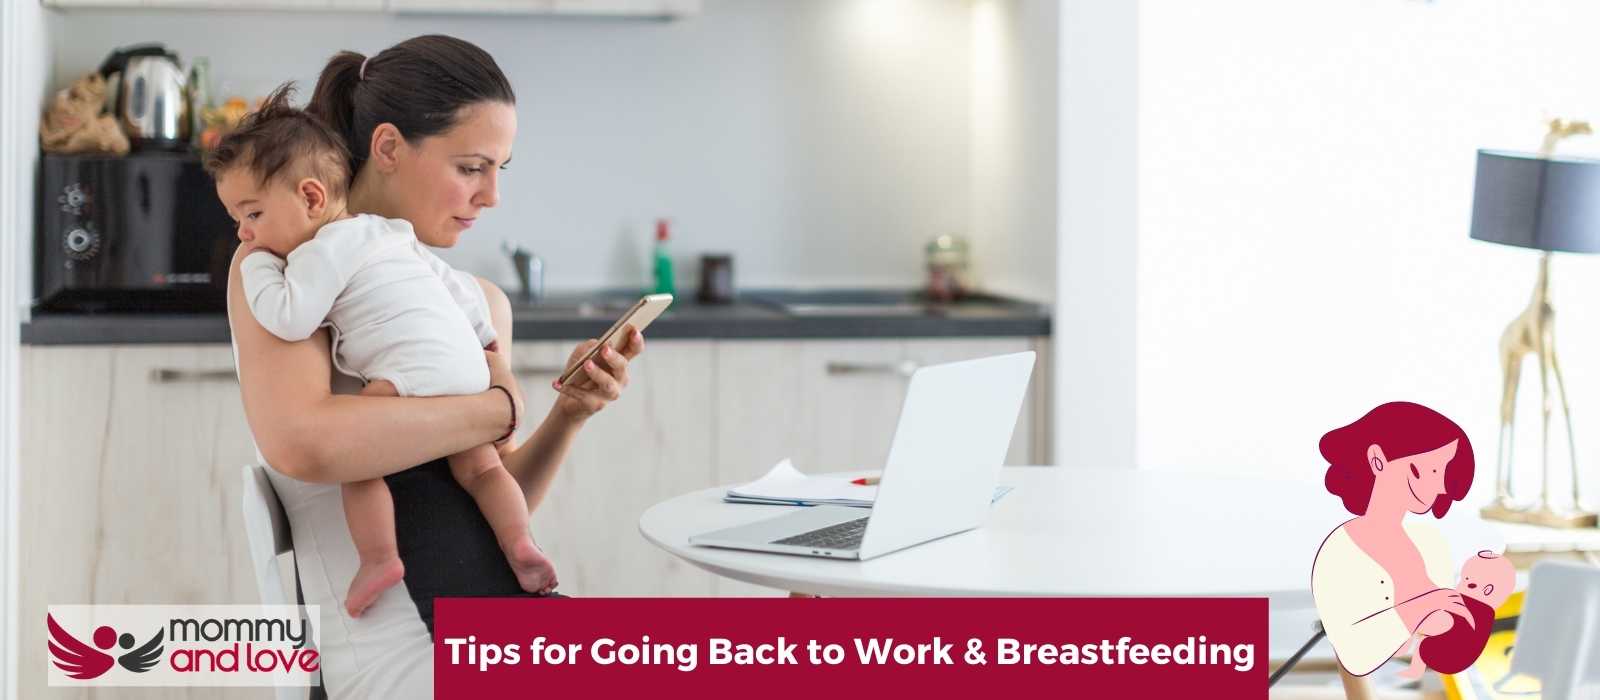 Tips for Going Back to Work & Breastfeeding